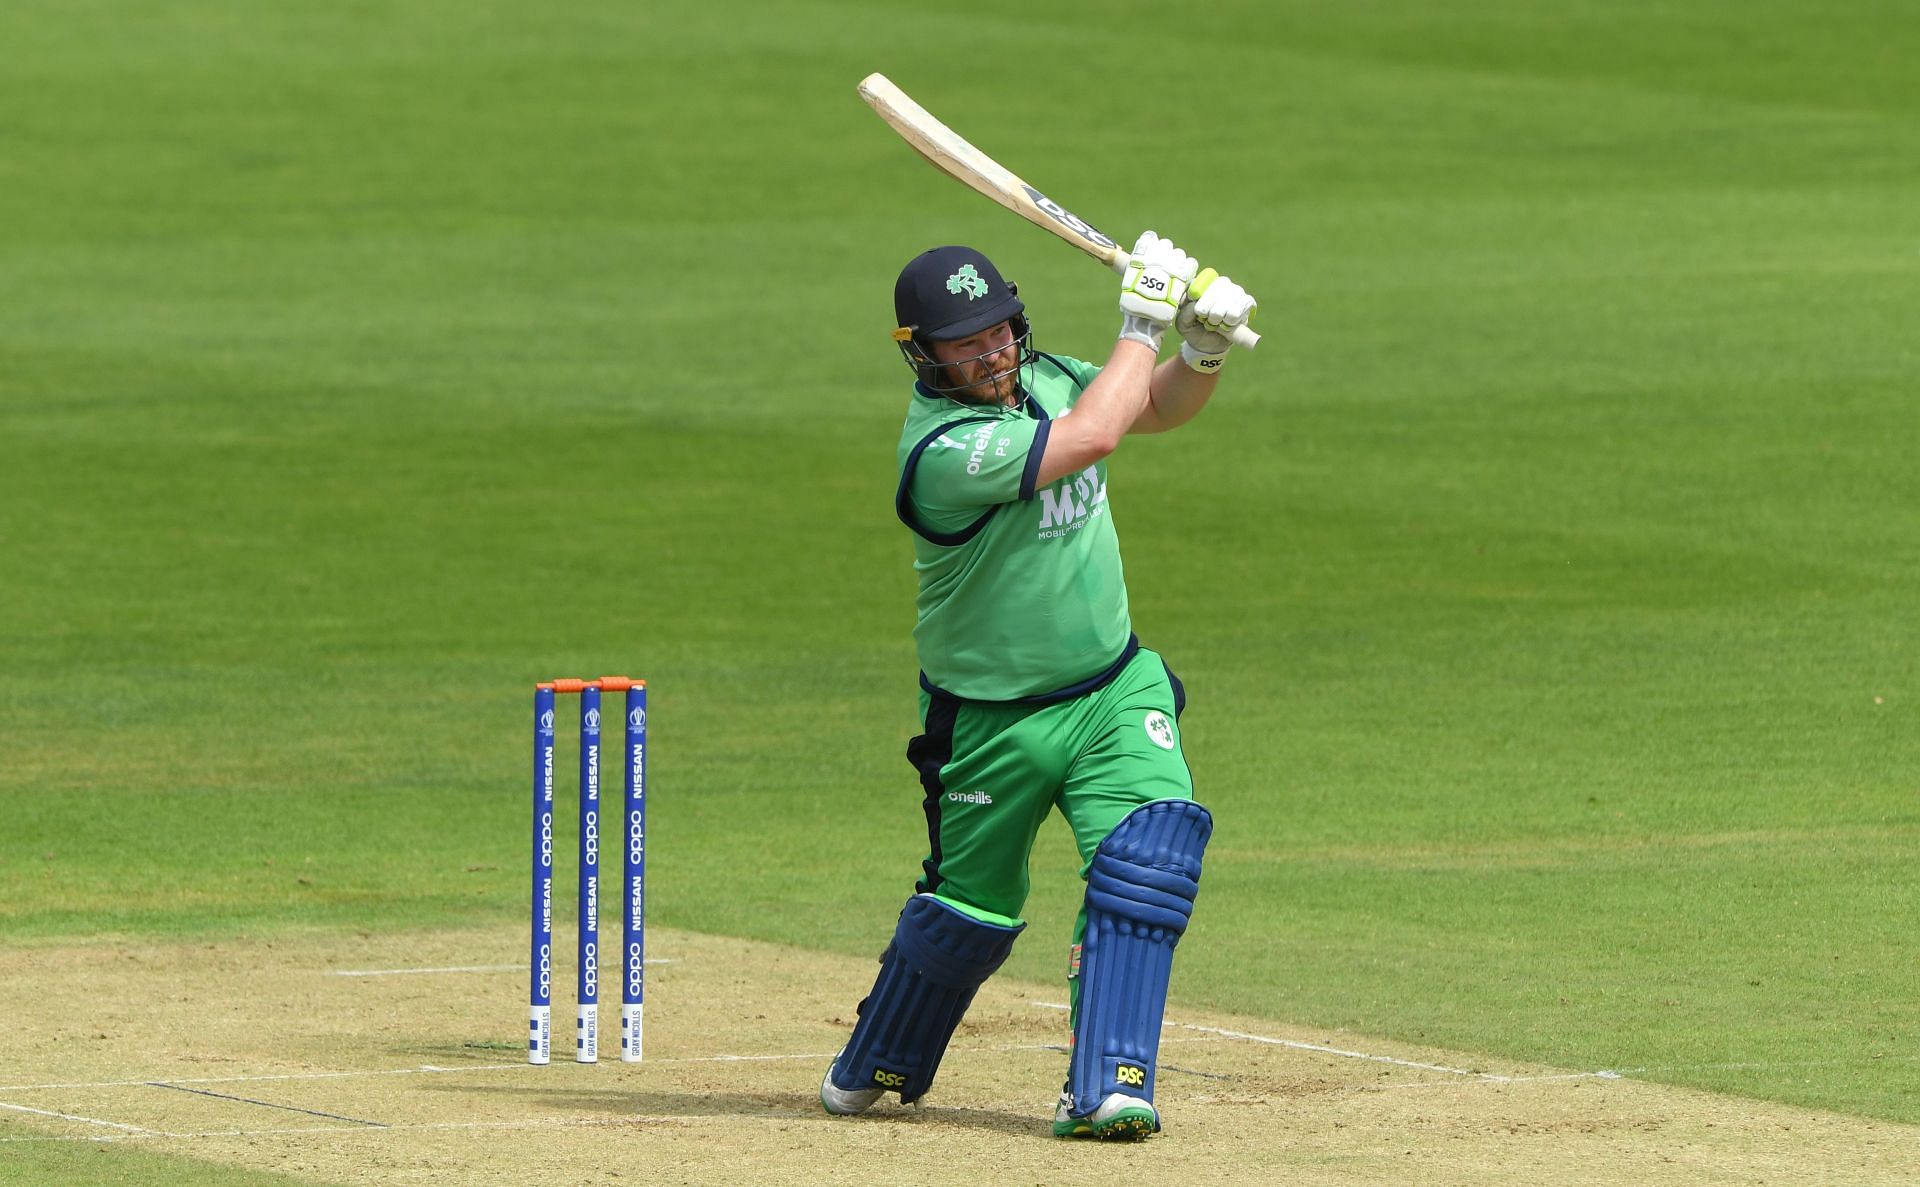 Paul Stirling is expected to be a crucial player for his side